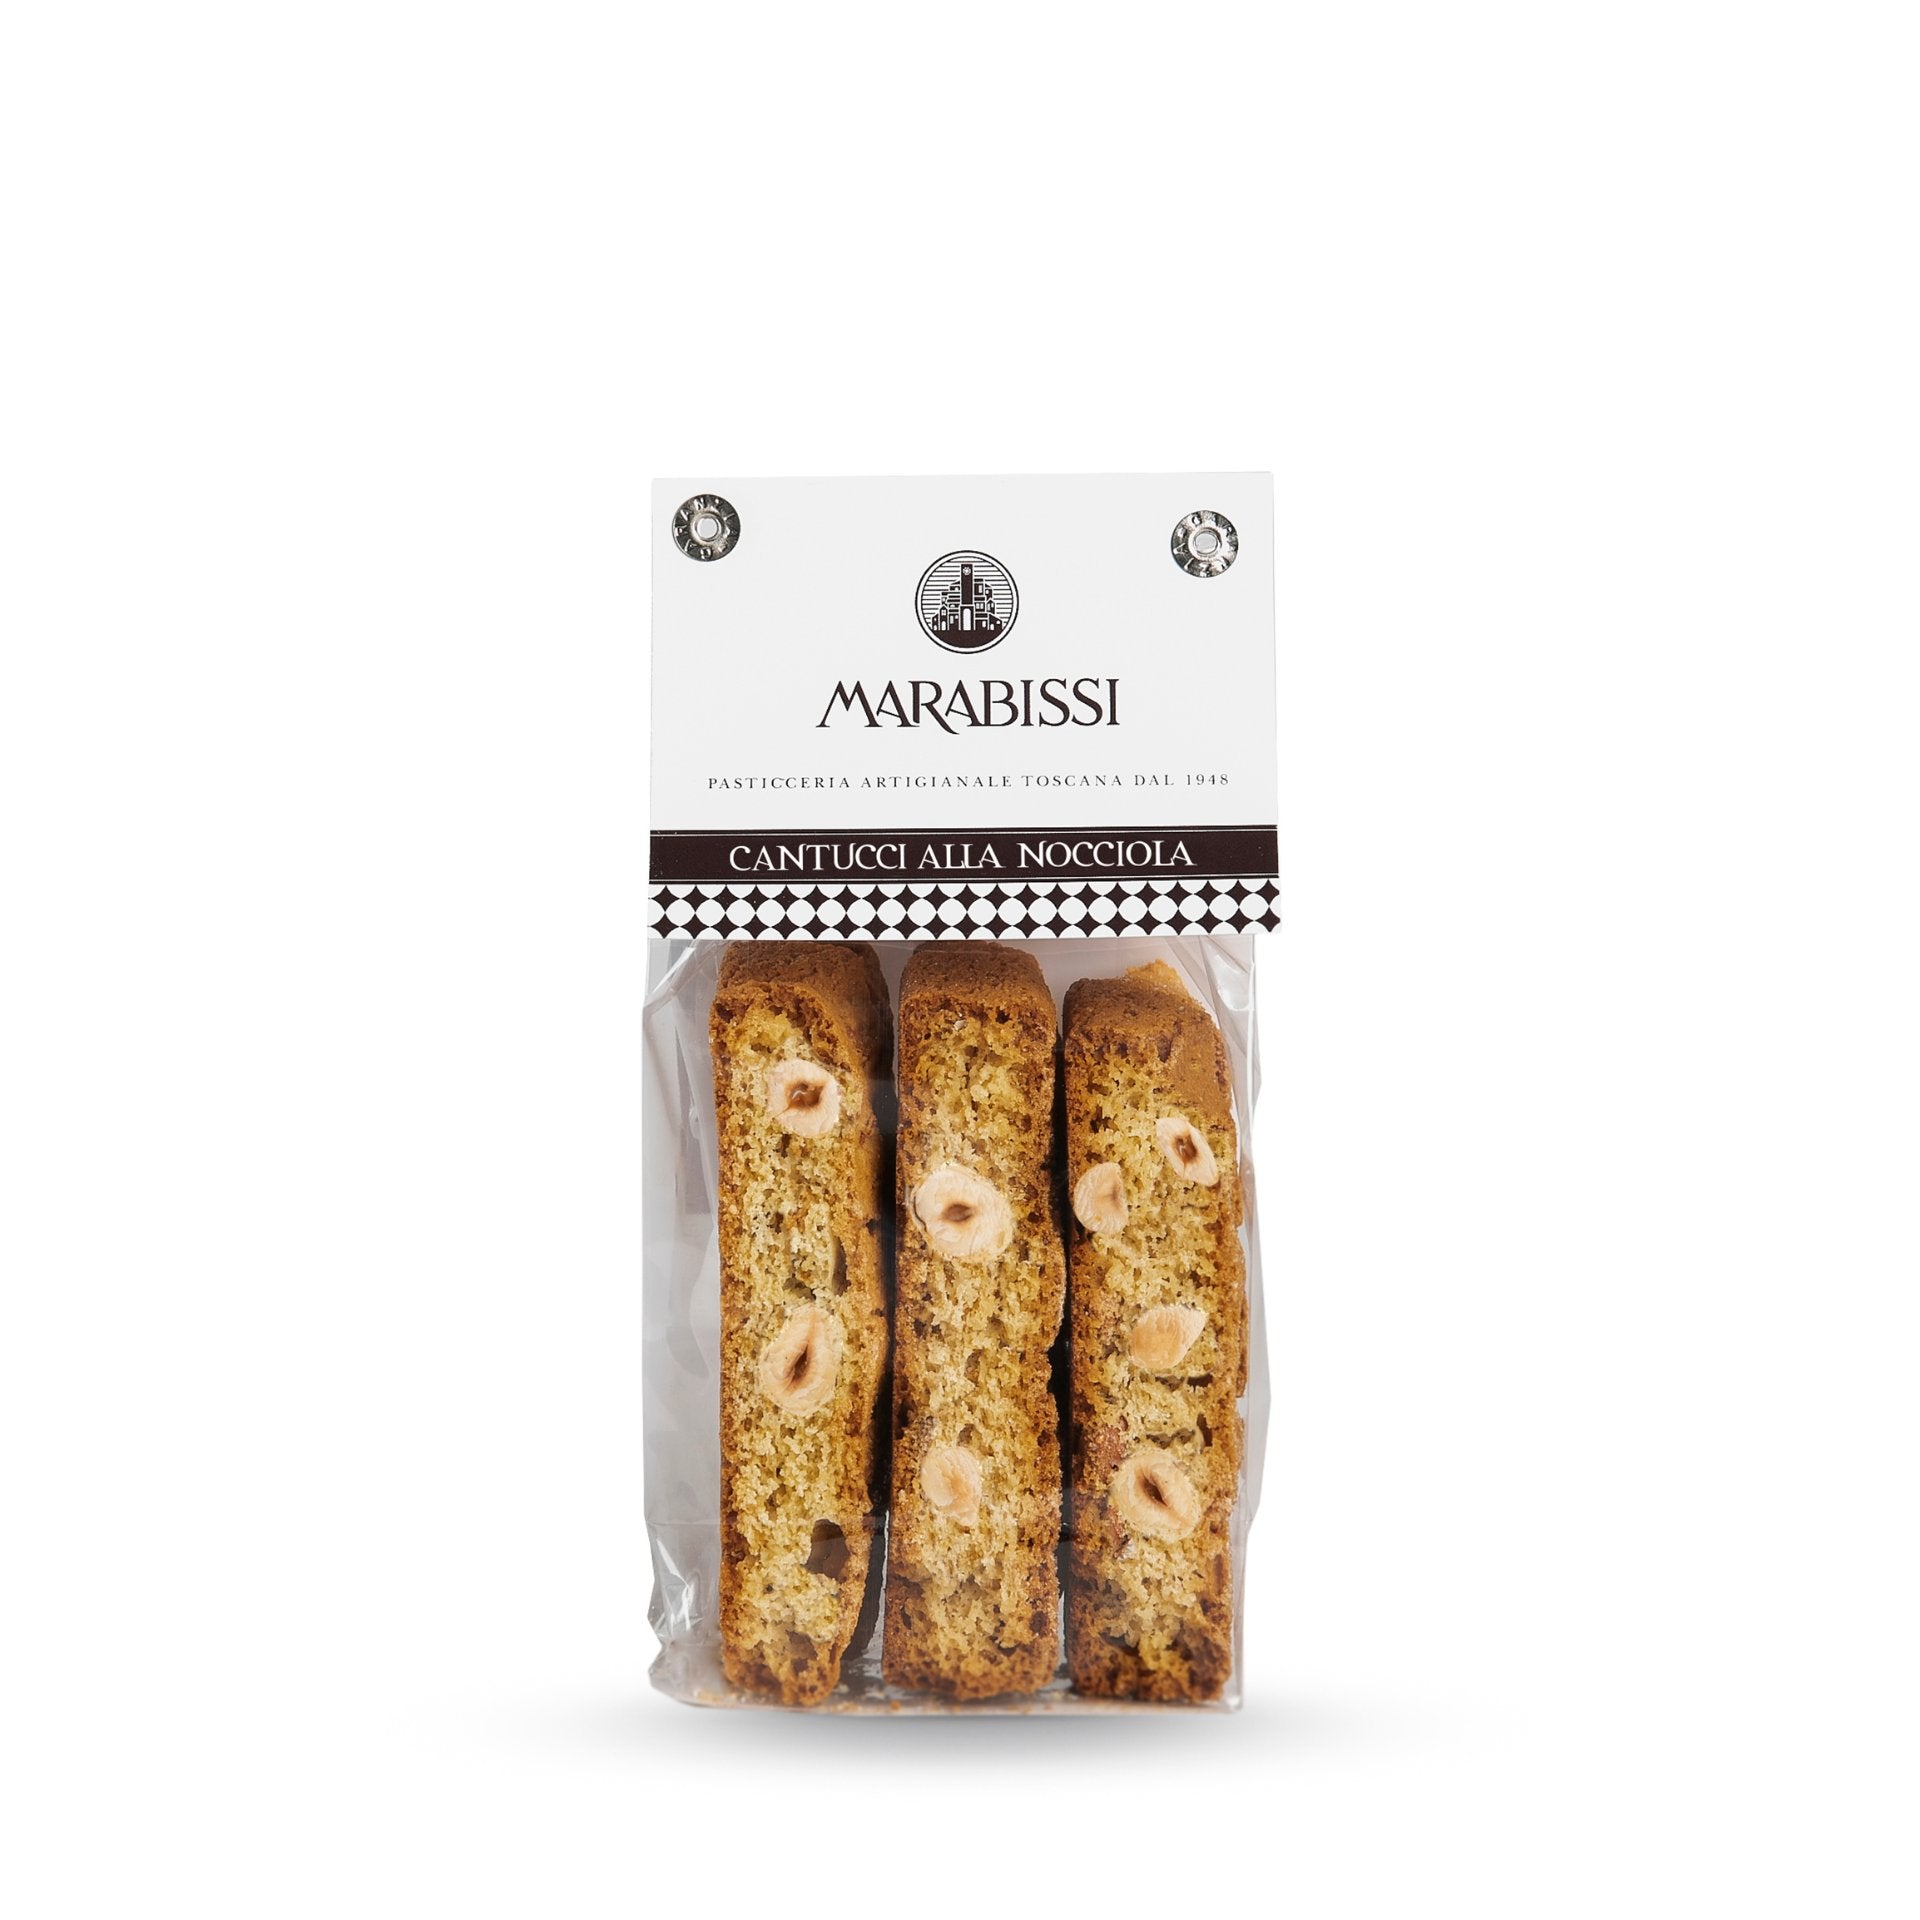 Marabissi Hazelnut Cantucci from Siena 120g Feast Italy